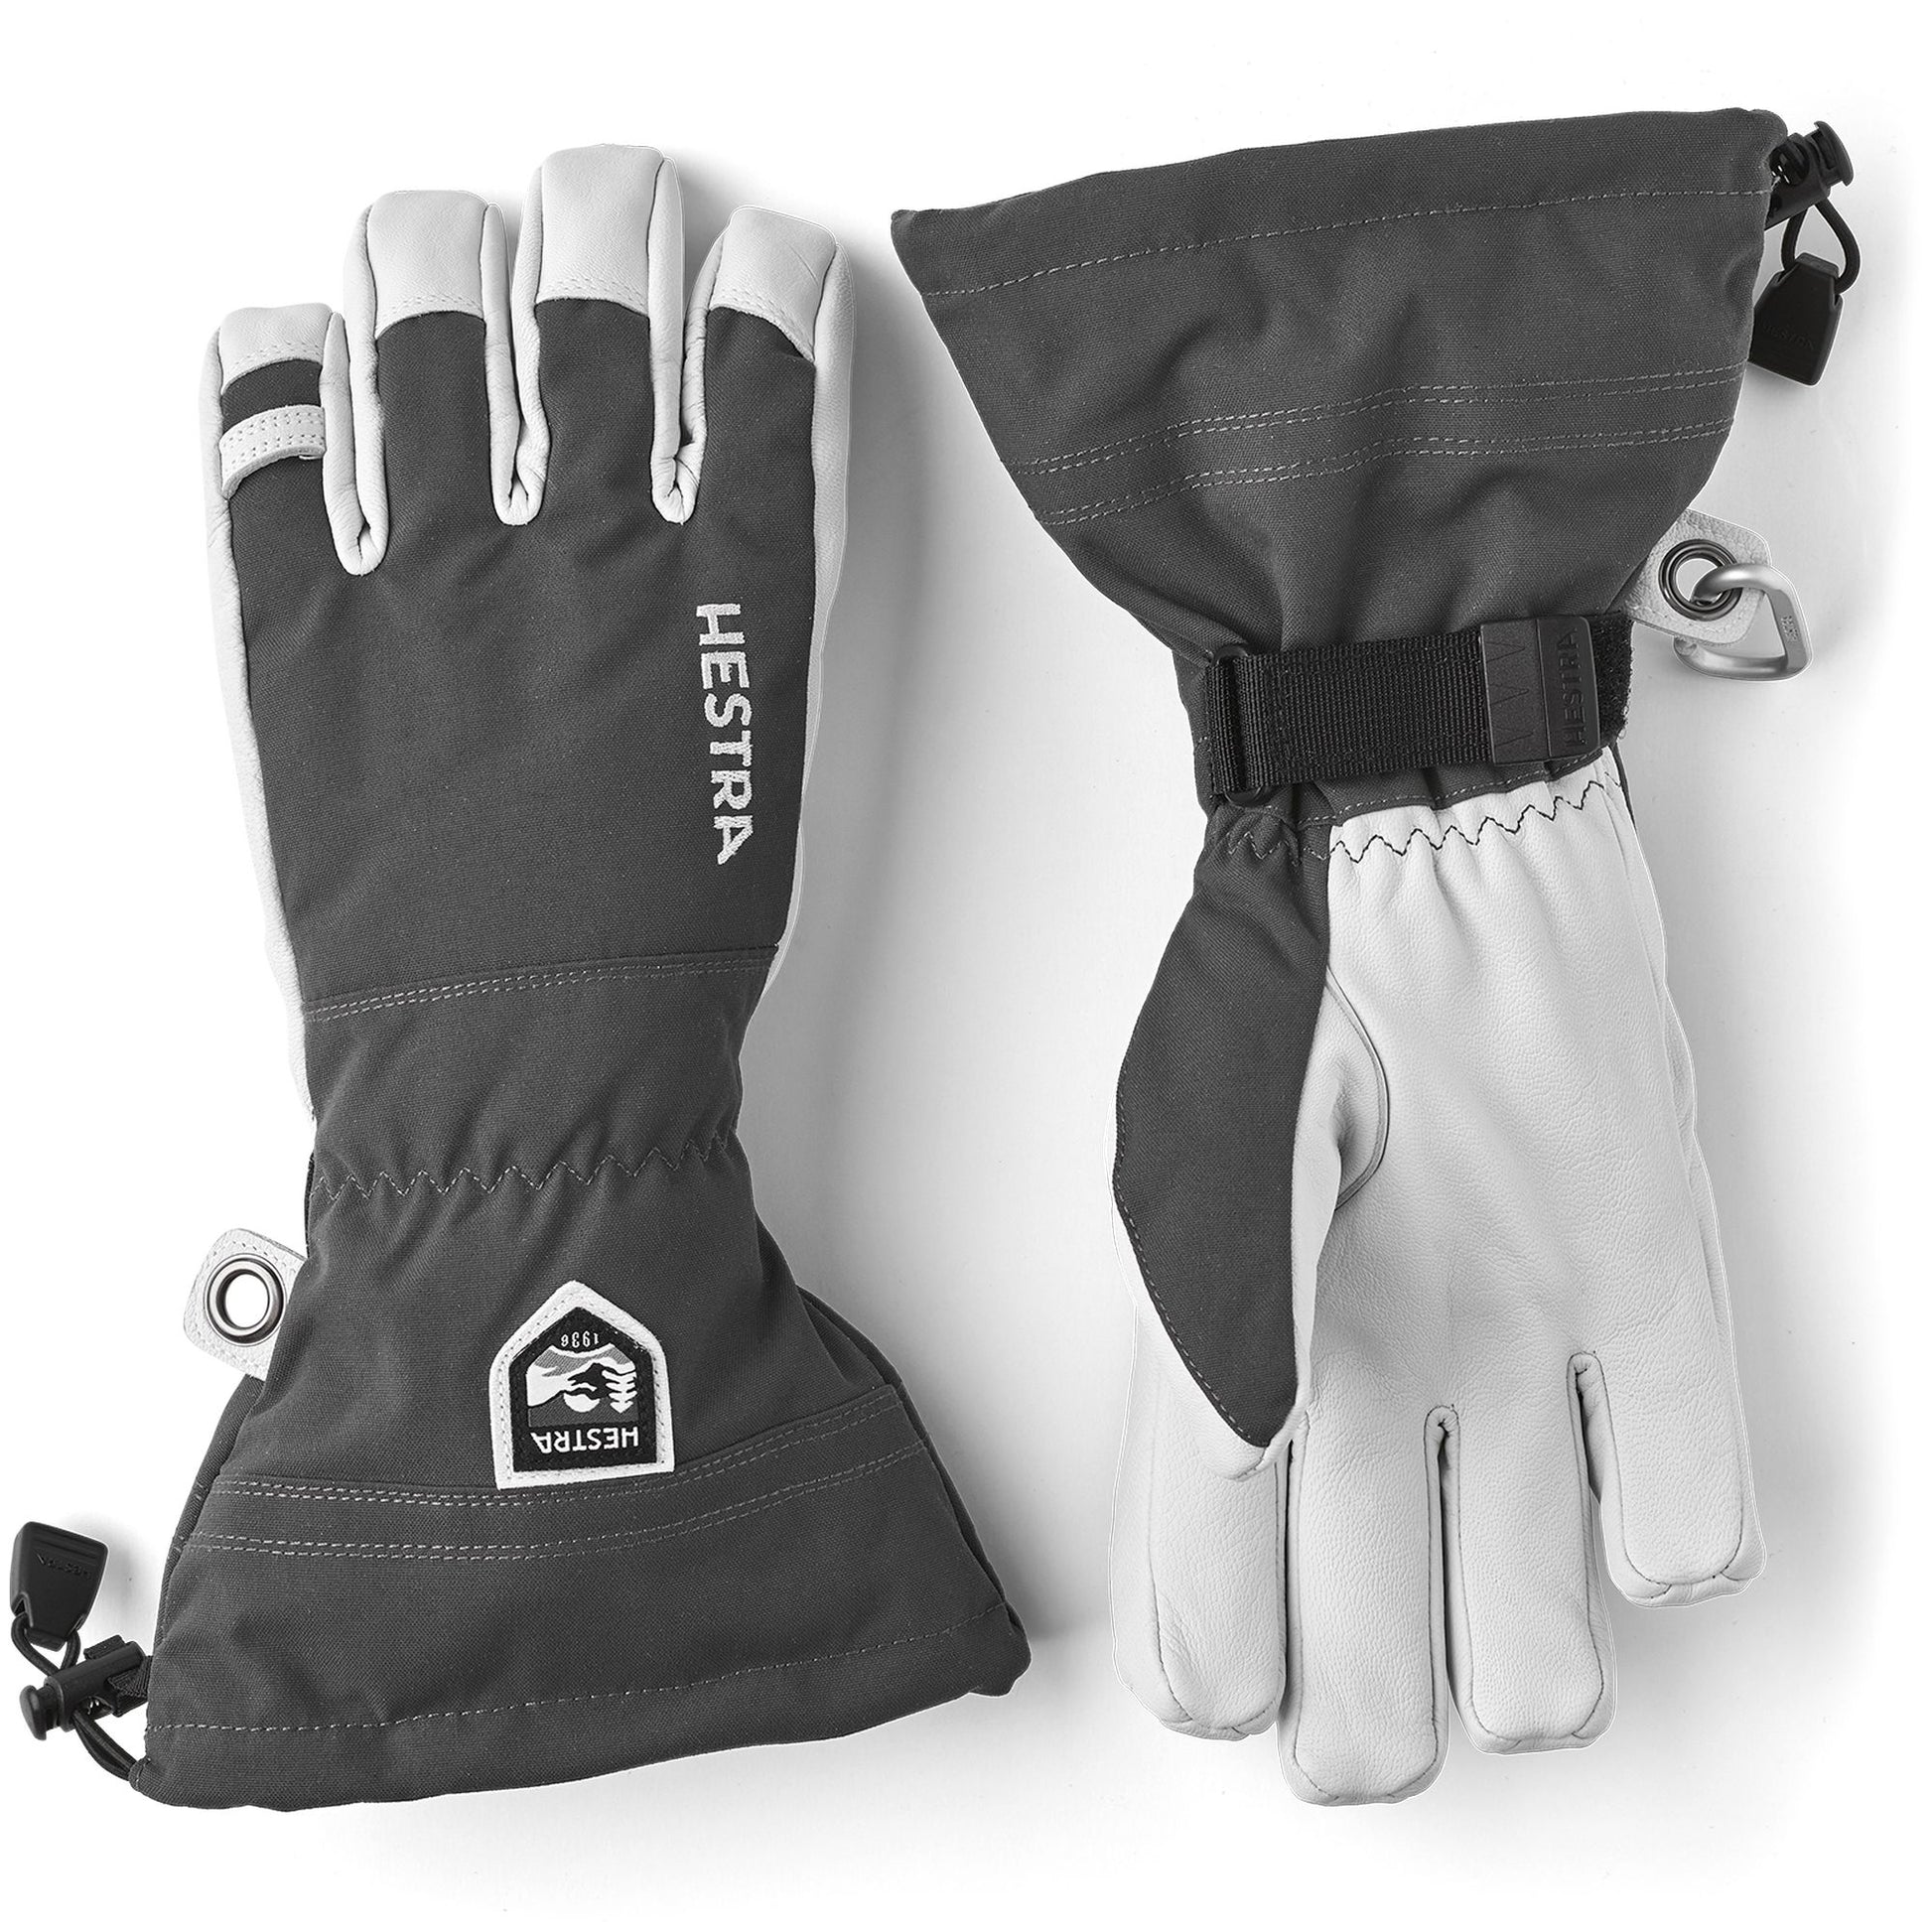 Alpine Reflective Full Finger Cycling Glove for Cool Weather